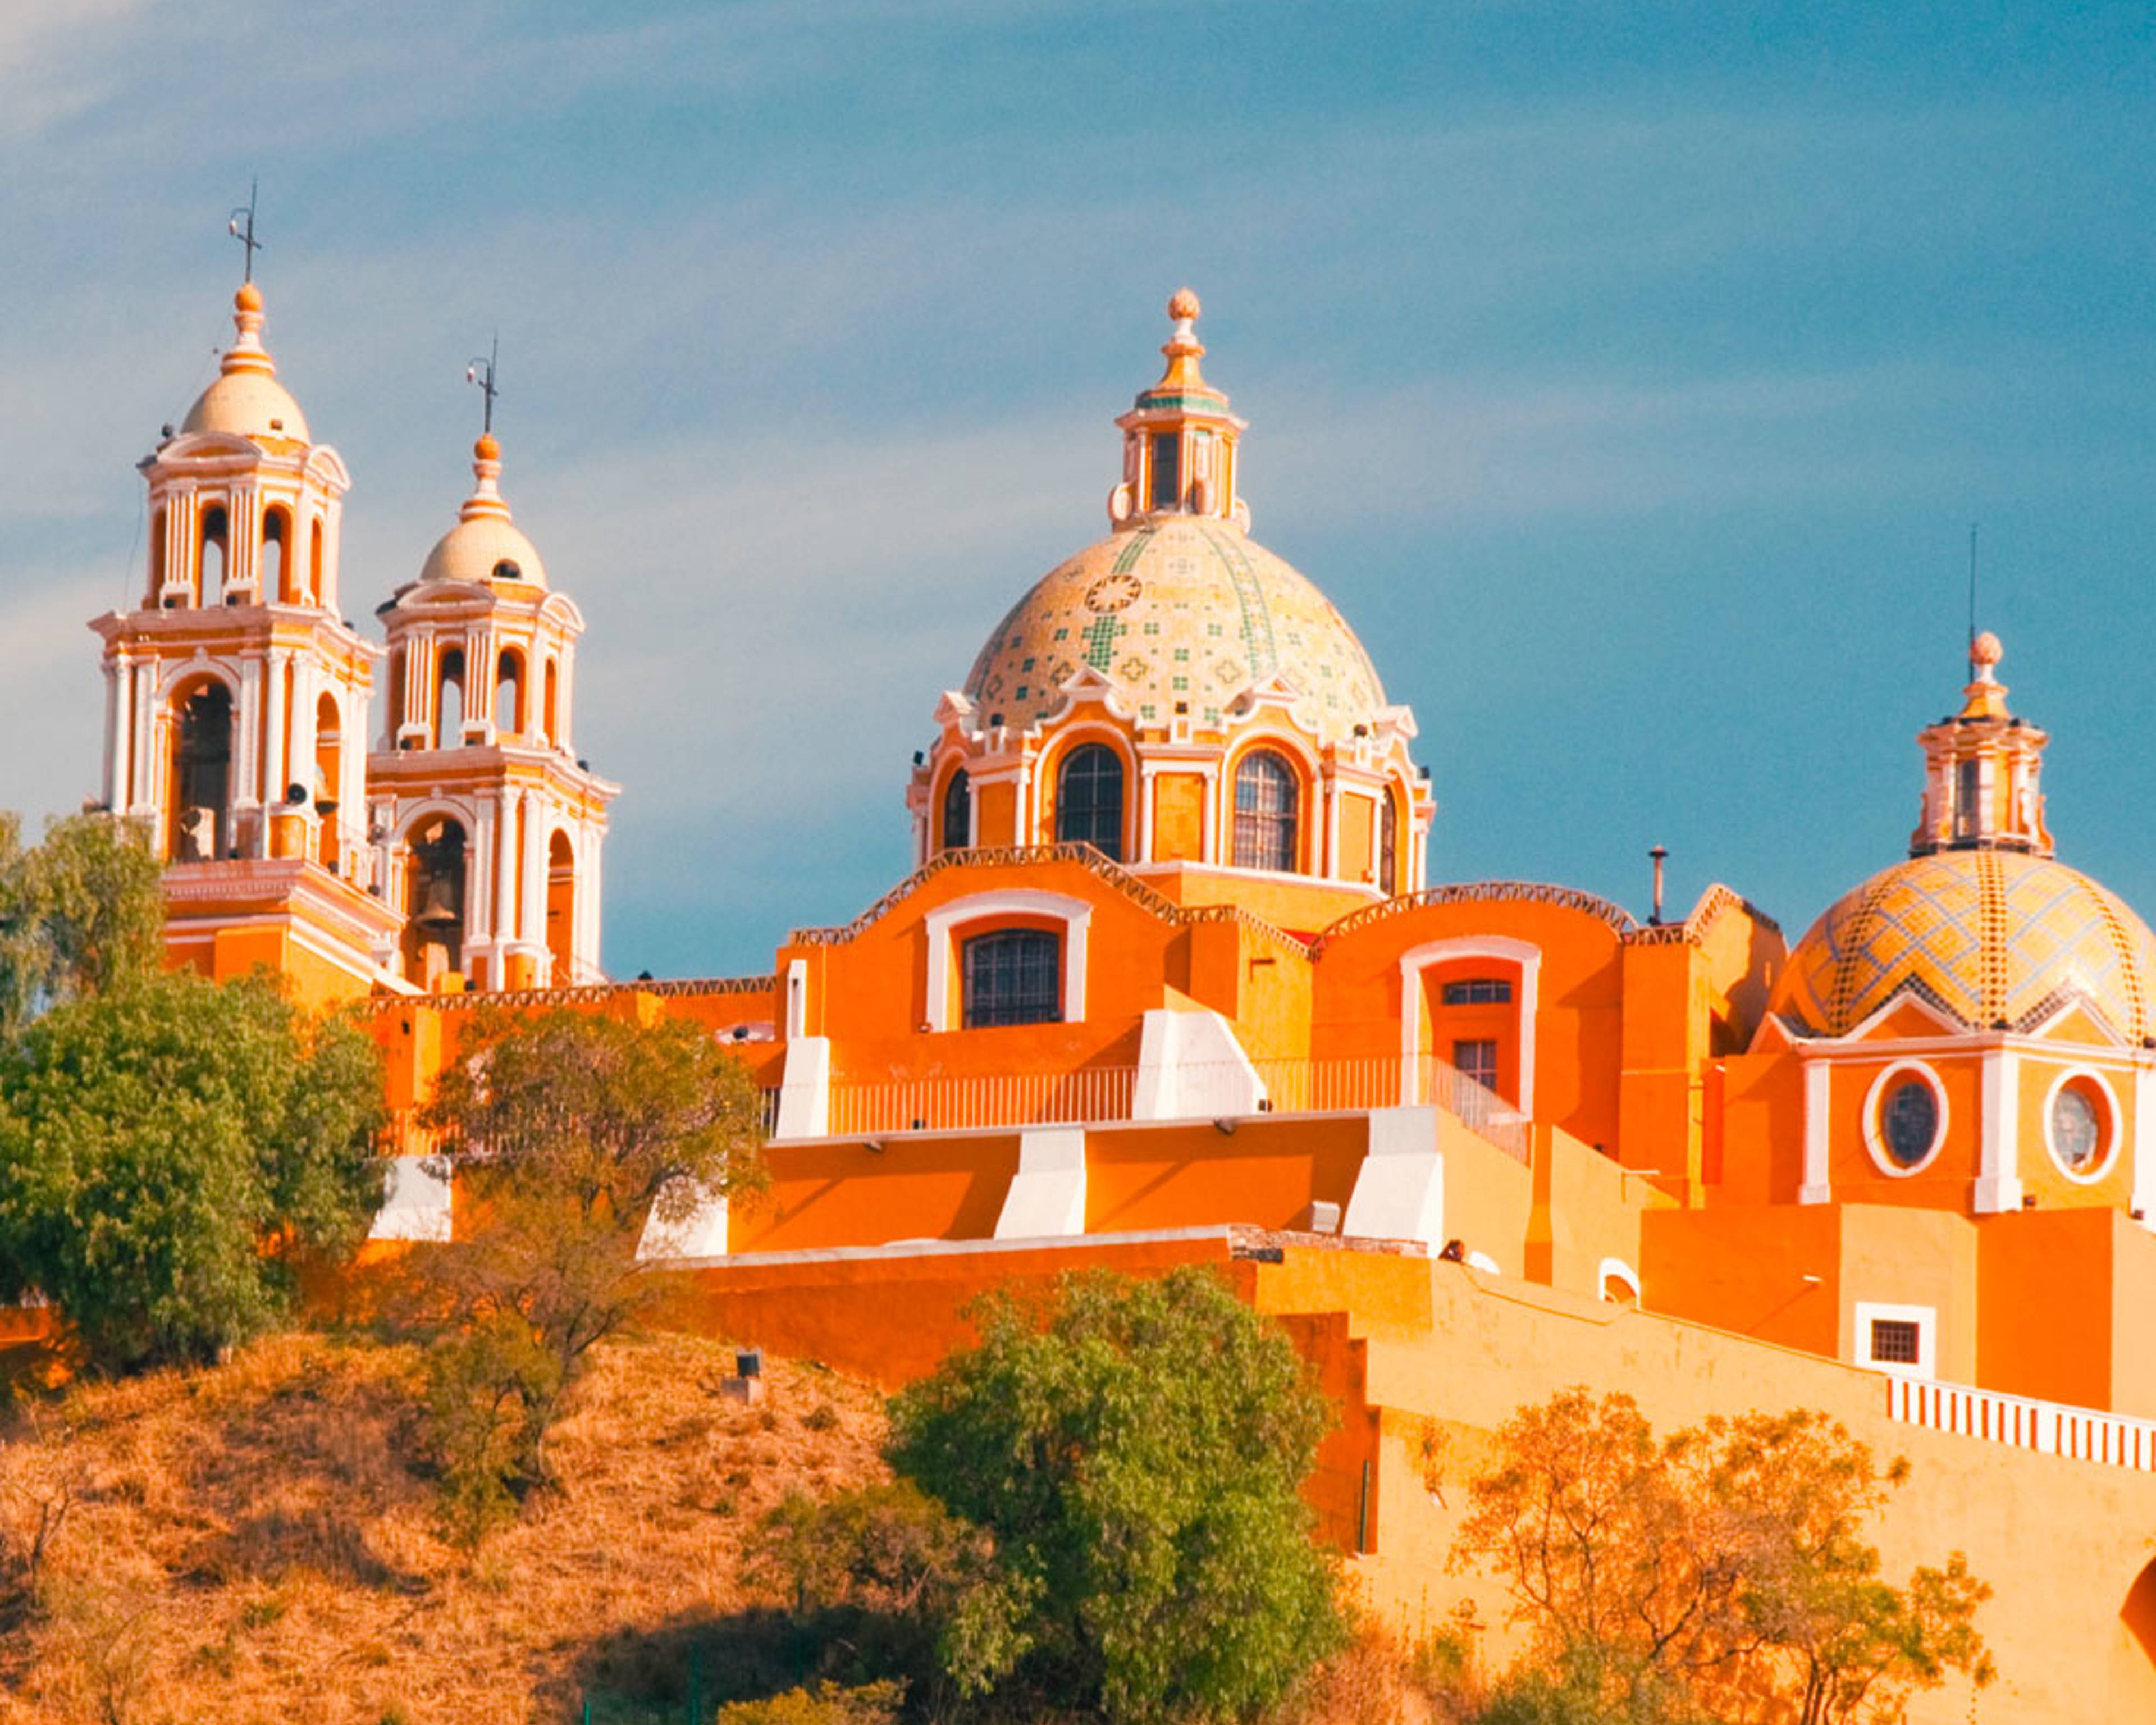 Experience Mexico off-the-beaten-track with a local expert